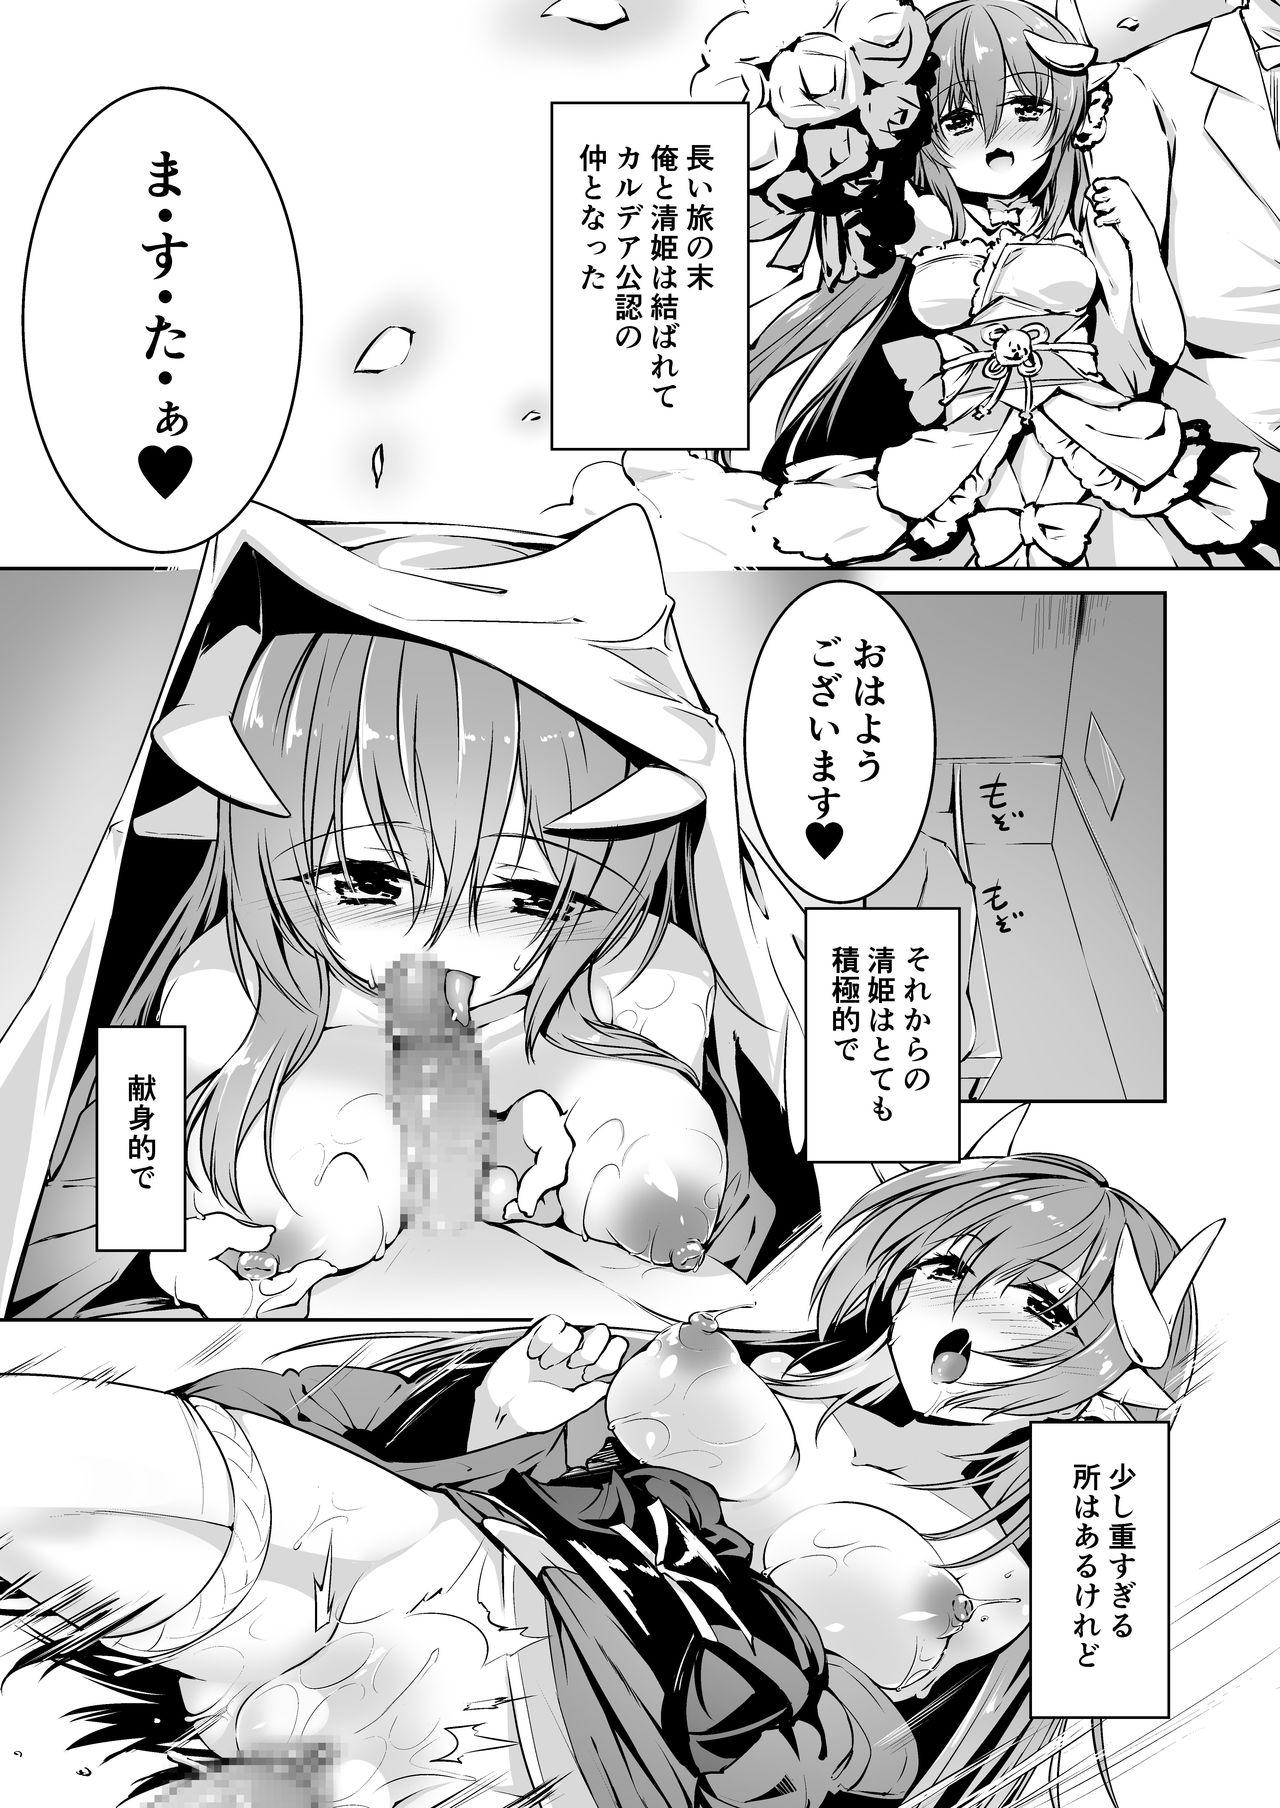 Lips Kiyohime Lovers vol. 02 - Fate grand order Gym - Page 4